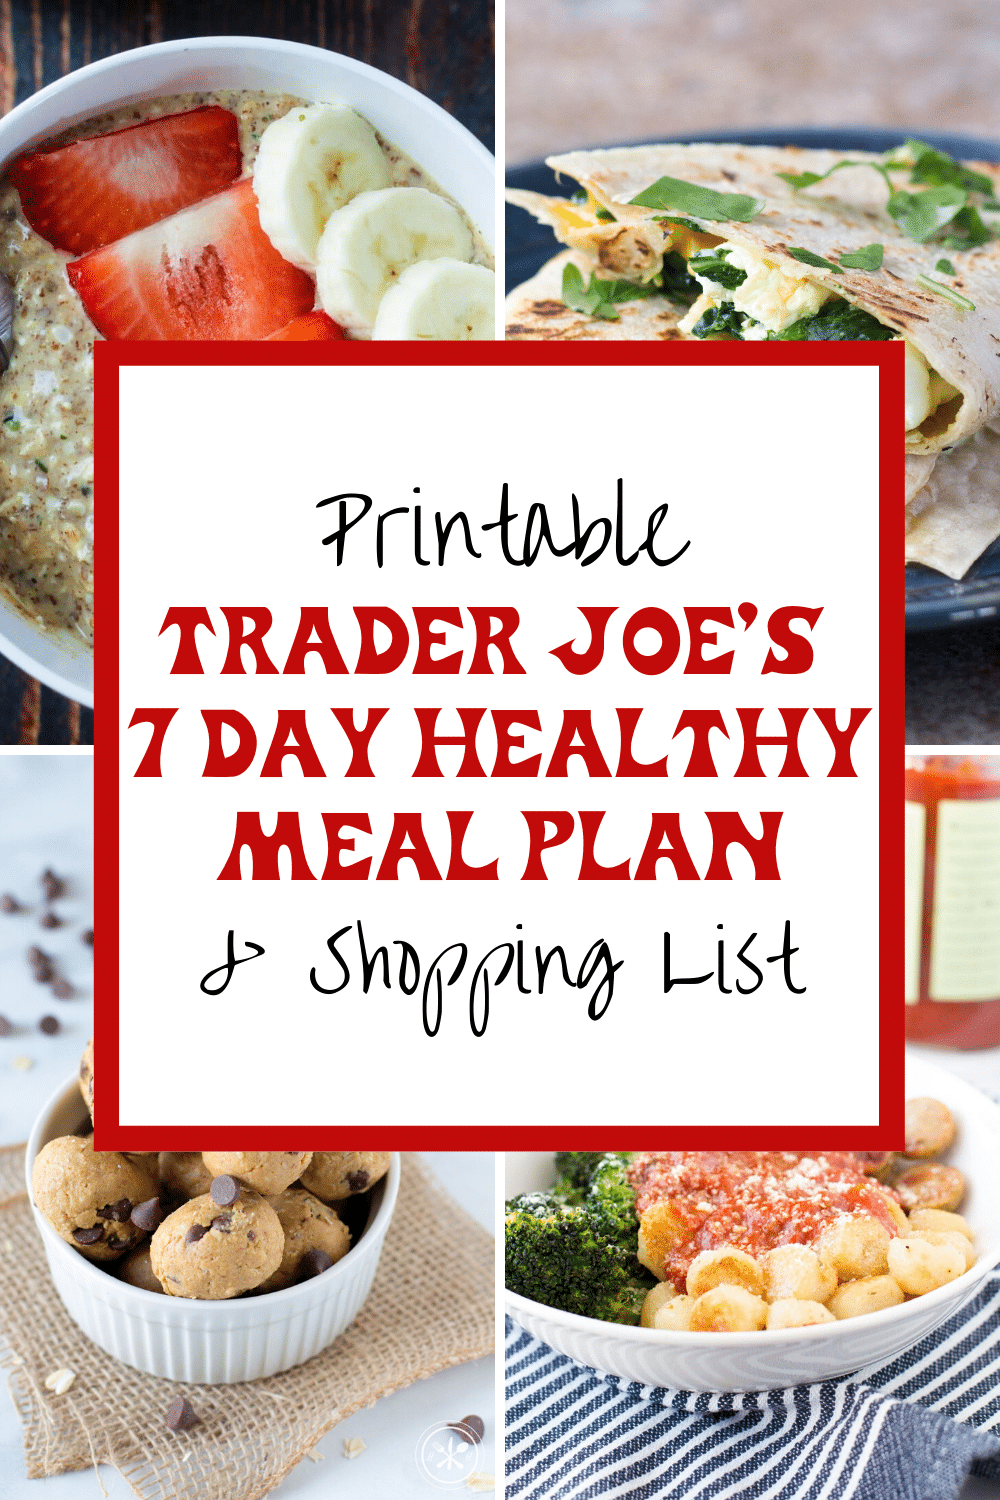 Healthy Trader Joe's Meal Plan & Shopping List -   14 healthy recipes On A Budget cleanses ideas